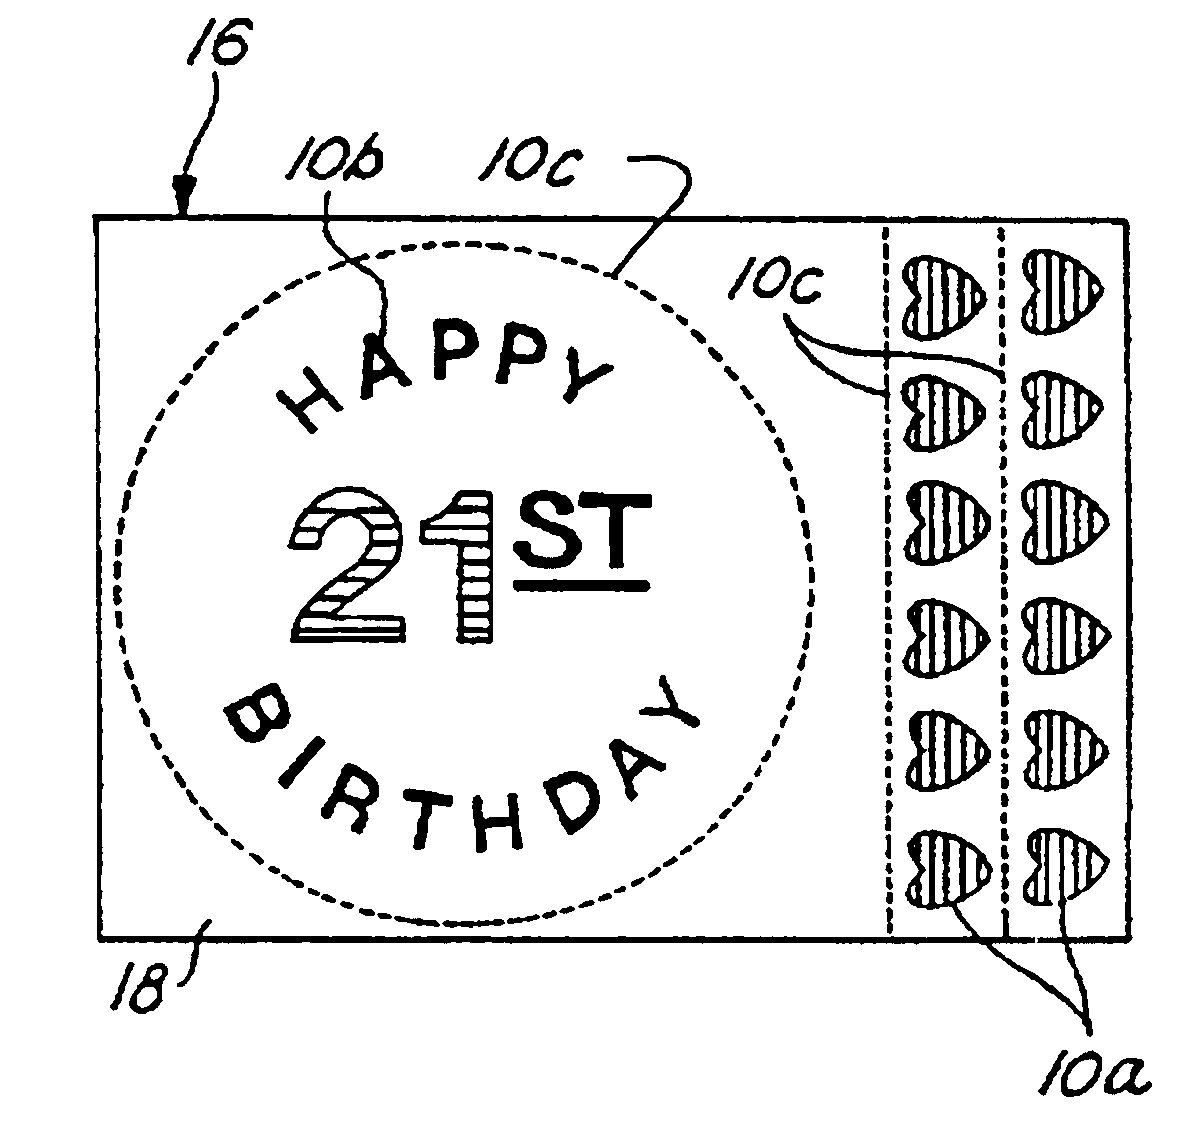 An image associated with U.S. Patent 6,319,530 depicting what could be printed onto a birthday cake using an inject printer and edible ink.